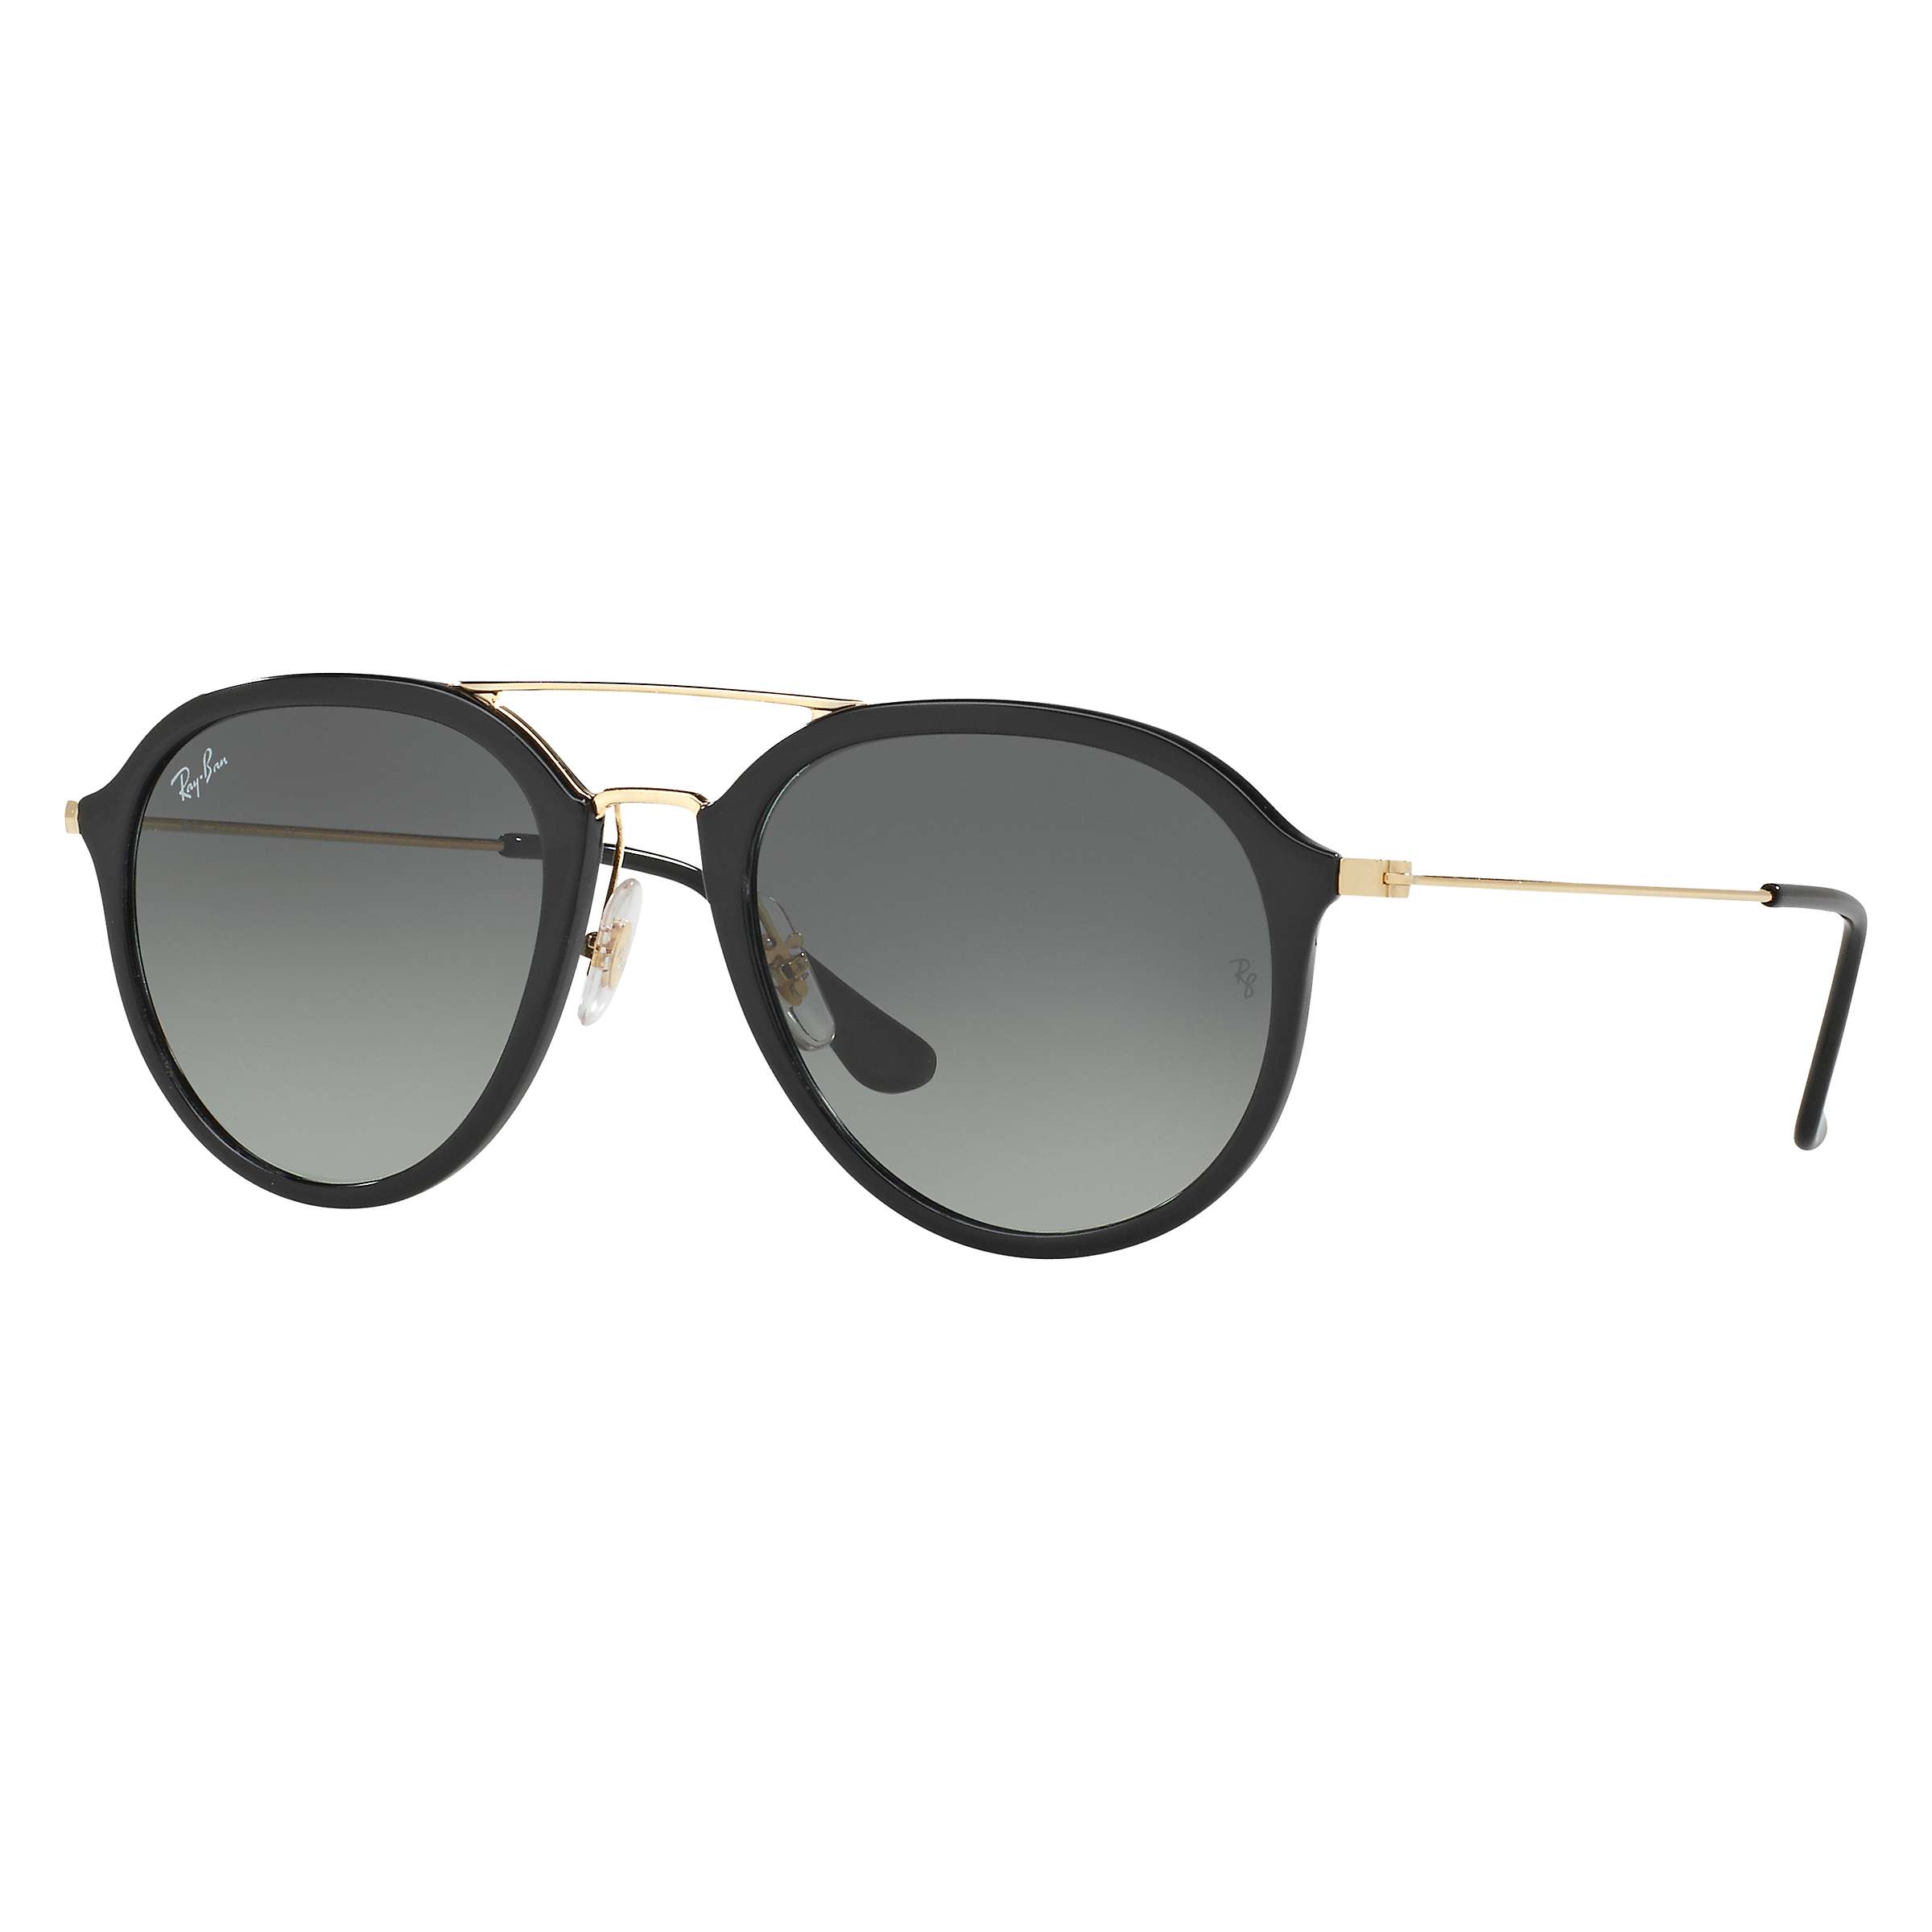 Buy Ray-Ban RB4253 Aviator Sunglasses Online at johnlewis.com